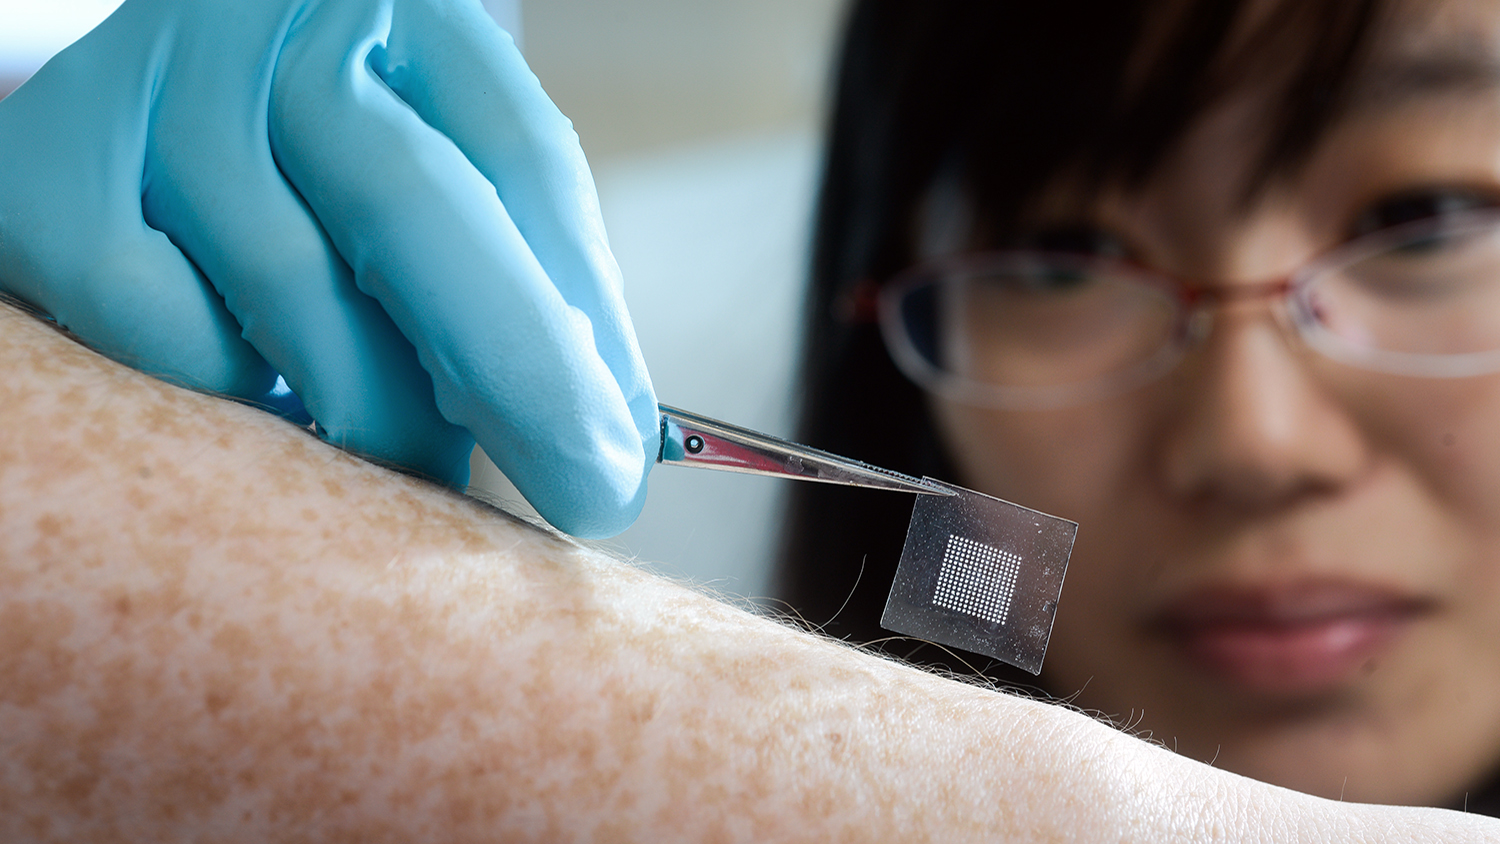 A researcher applies an insulin patch to a freckled forearm.